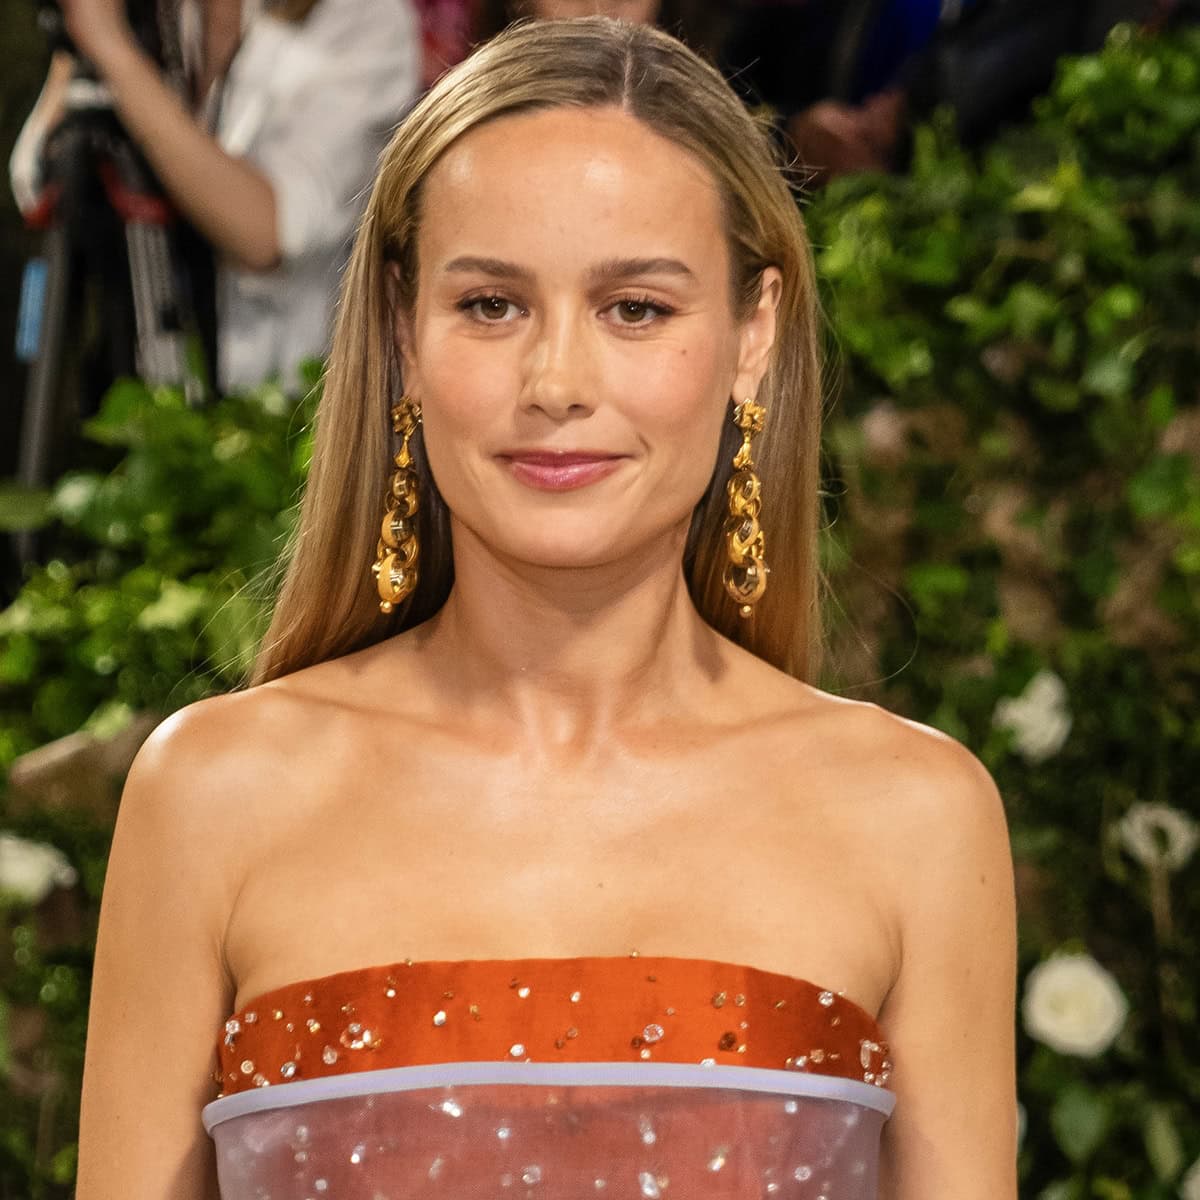 Brie Larson complements her Met Gala ensemble with Fred Leighton Georgian 18K yellow gold Greek key motif pendant earrings, featuring interlocking links and textured rings that add a touch of timeless sophistication